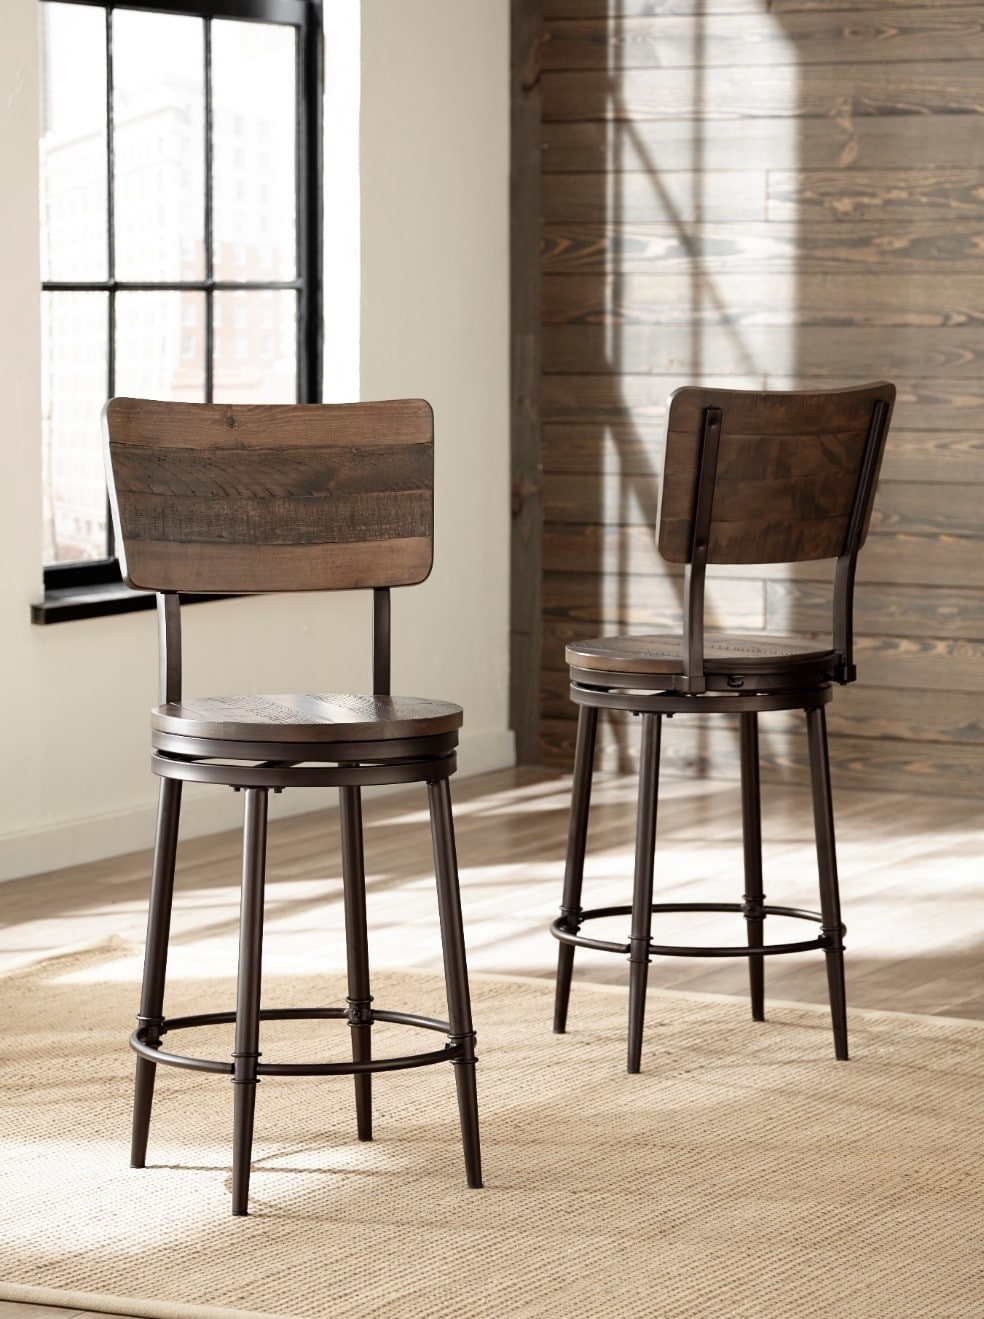 Hillsdale Furniture Recalls Counter-Height Bar Stools for Fall Hazard